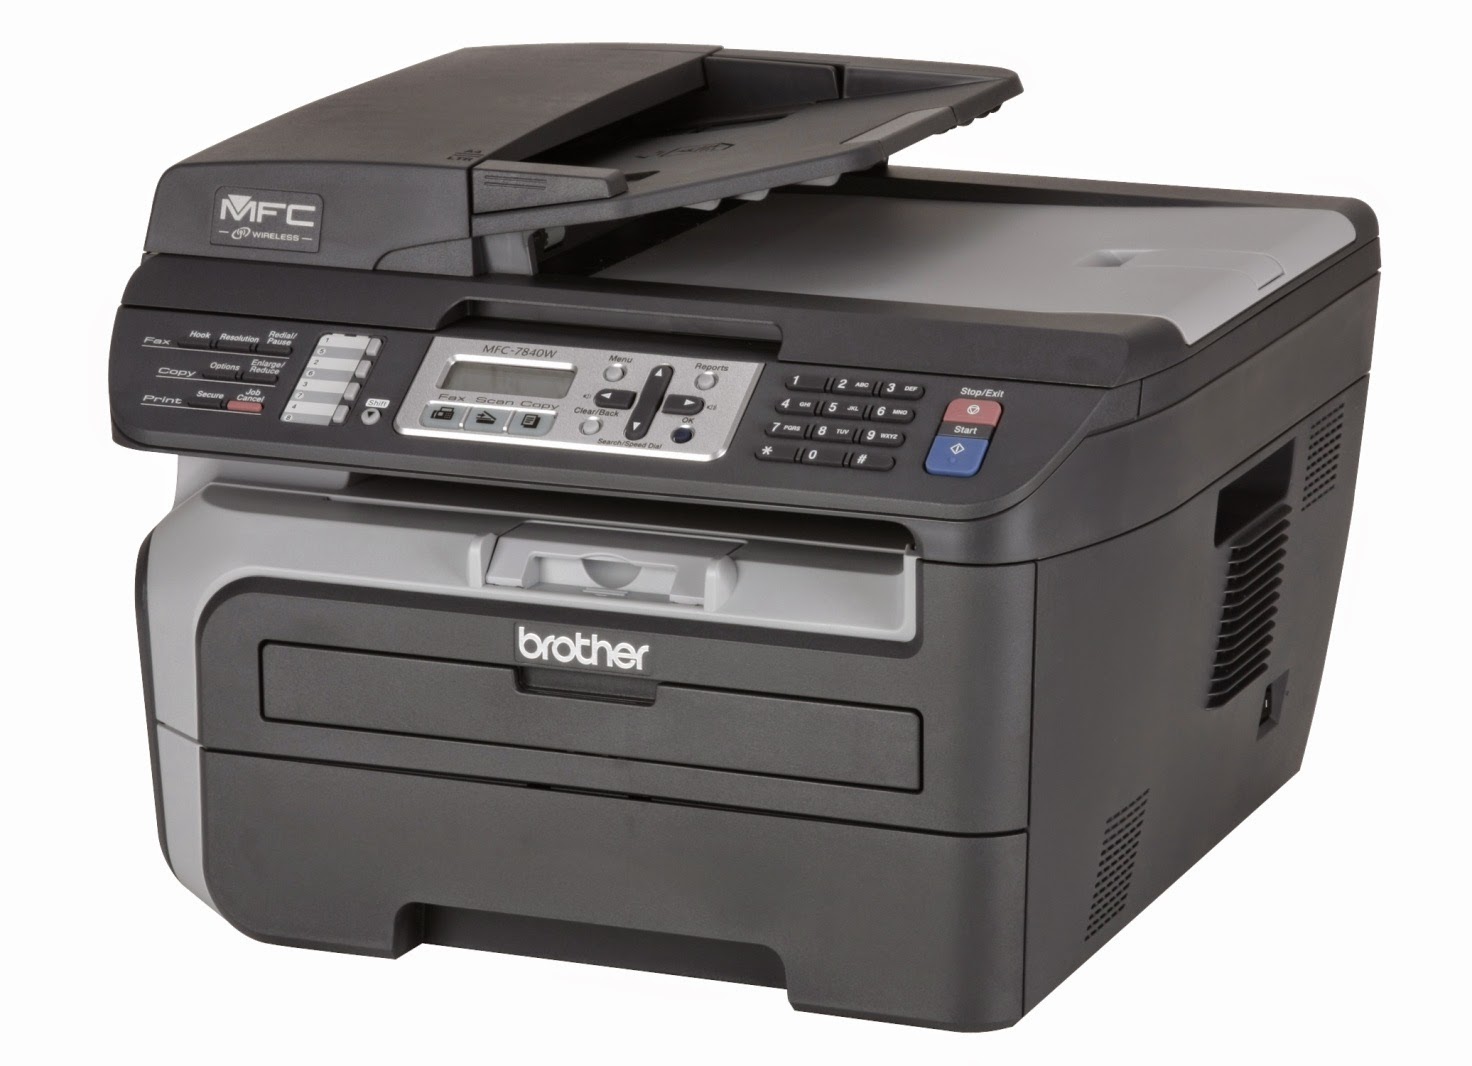 download driver for brother printer